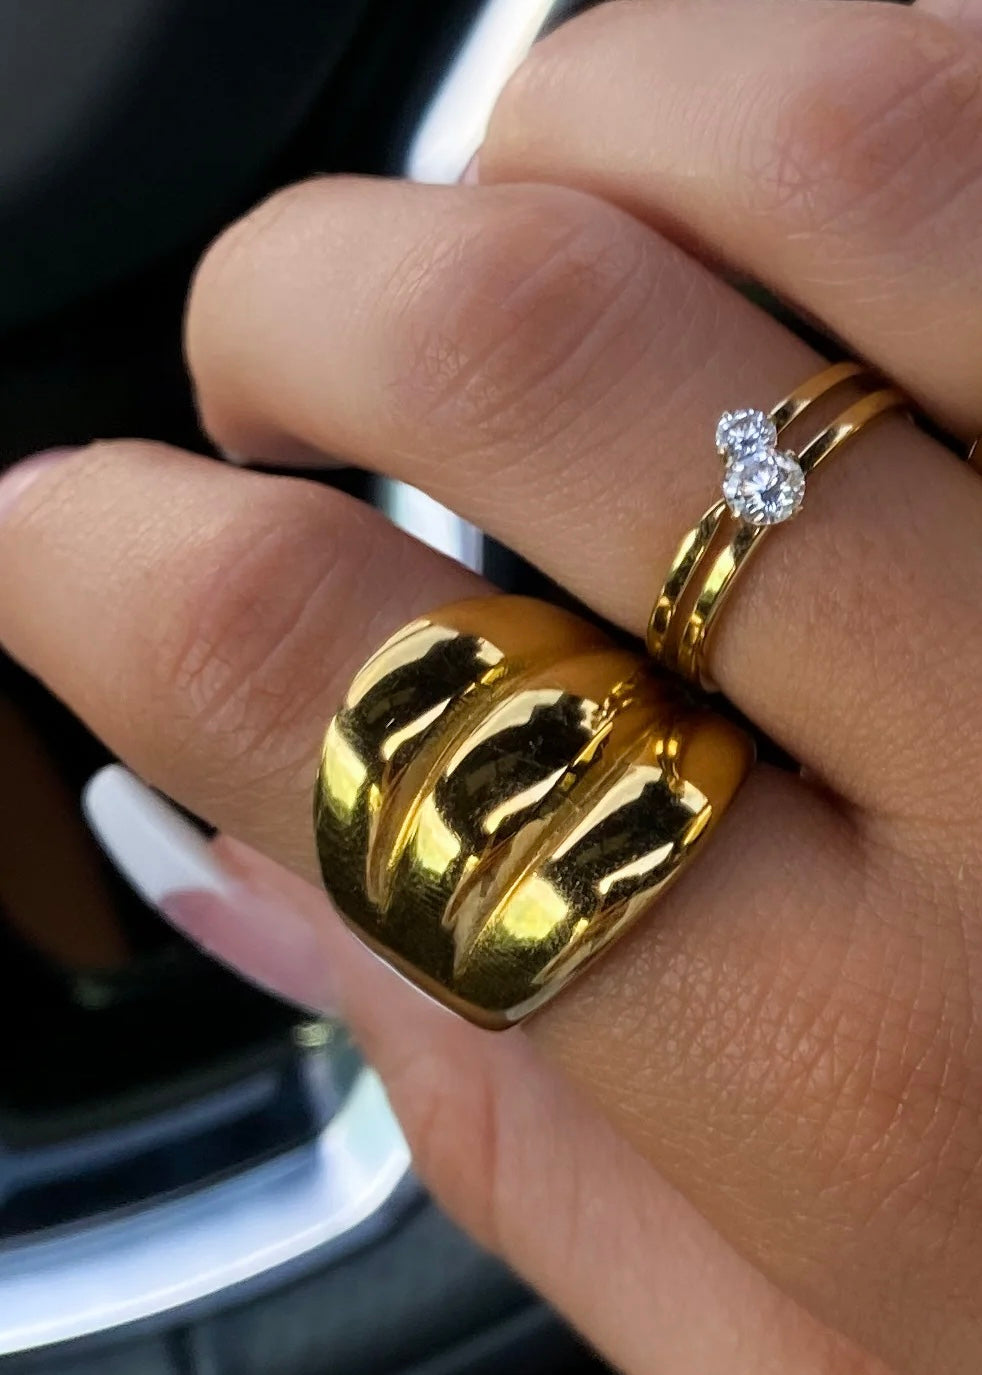 The Gold Thick Shell Ring